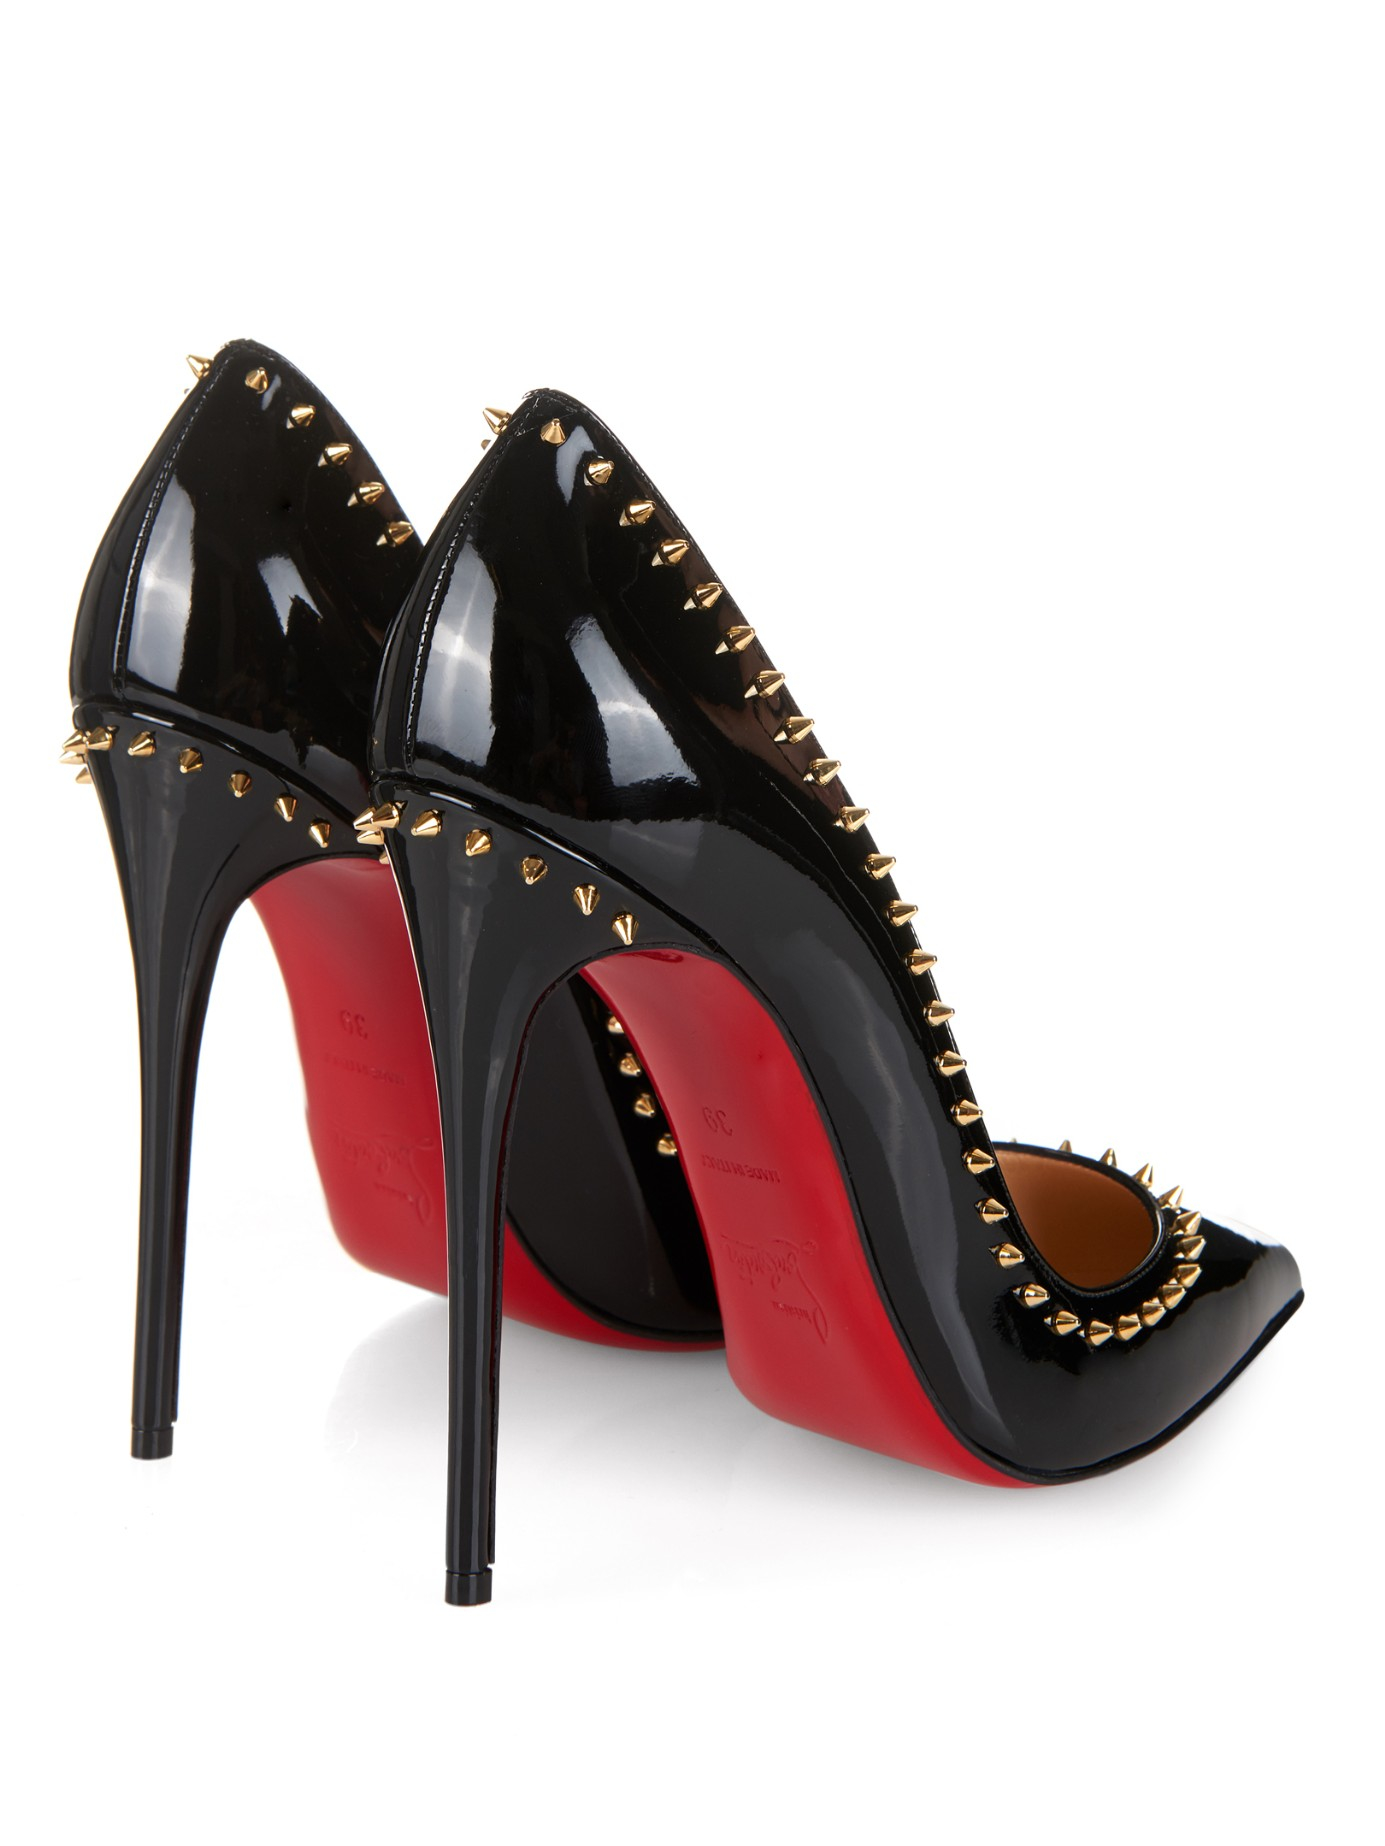 Lyst - Christian Louboutin Anjalina Studded Patent Leather Pumps in Black